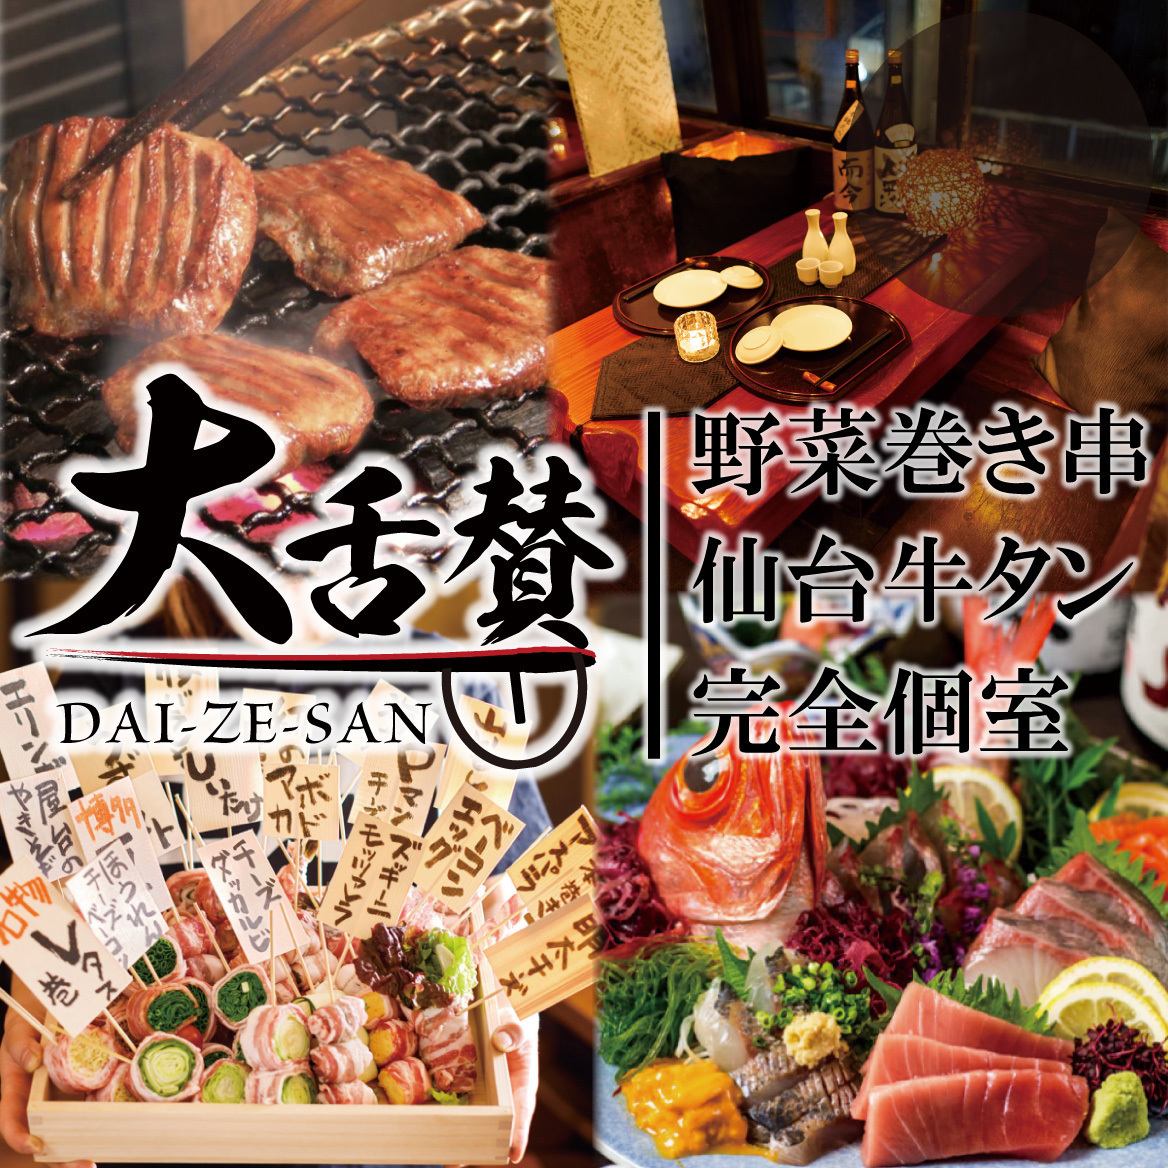 ■Authentic Japanese food x Creative Japanese food Daitsubasa Shinjuku East Exit Store ■Banquets and receptions/Online reservations accepted 24 hours a day